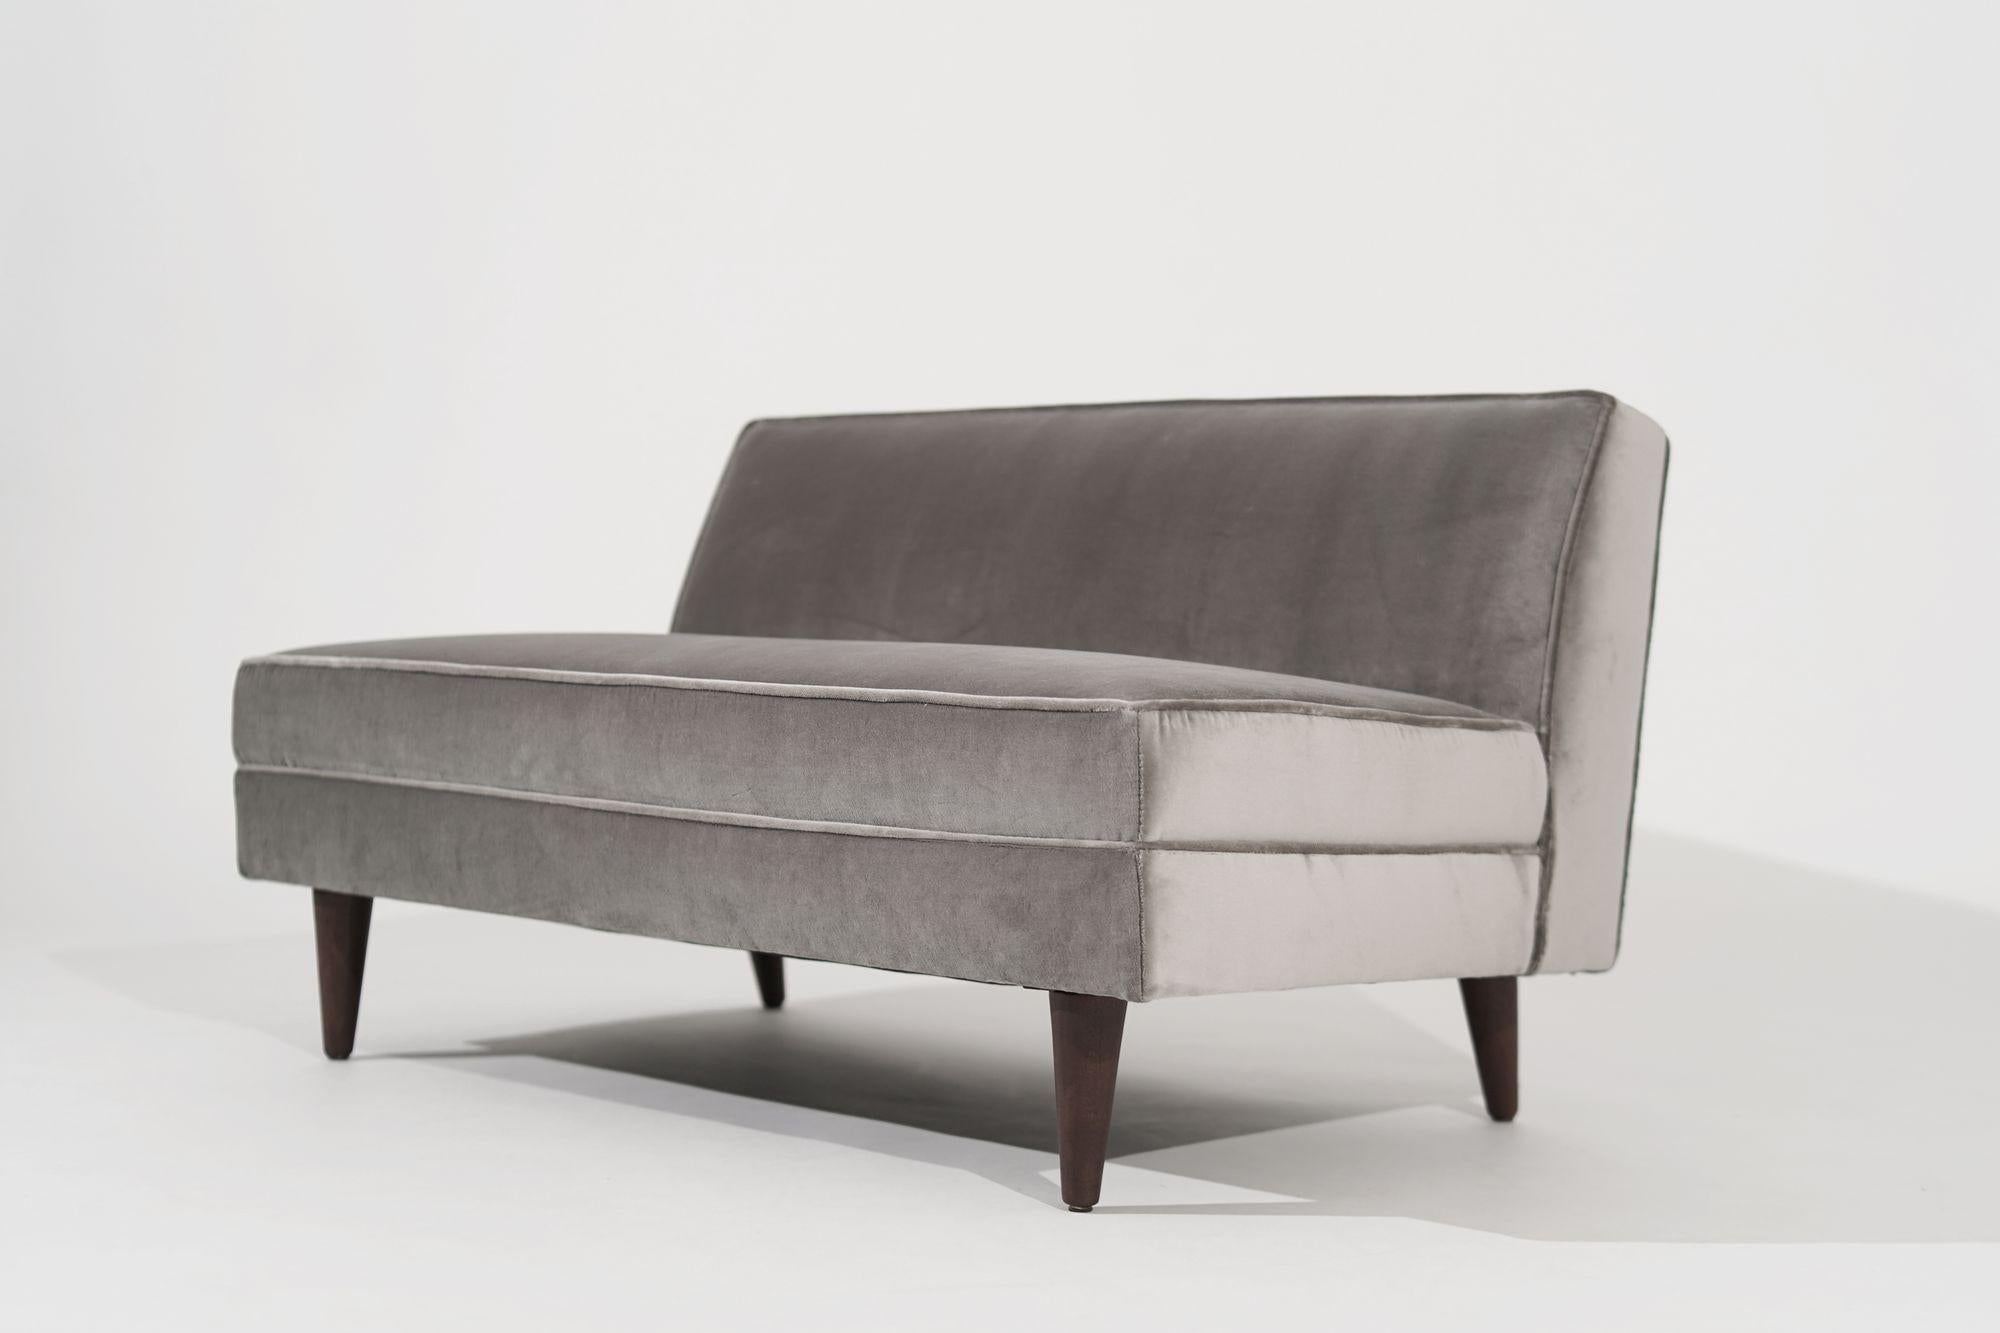 Mid-Century Modern Loveseat designed by Edward Wormley for Dunbar, circa 1950-1959. Completely restored and reupholstered in grey cotton velvet by Holly Hunt.
 


Other designers from this period include T.H. Robsjohn-Gibbings, Hans Wegner, Gio